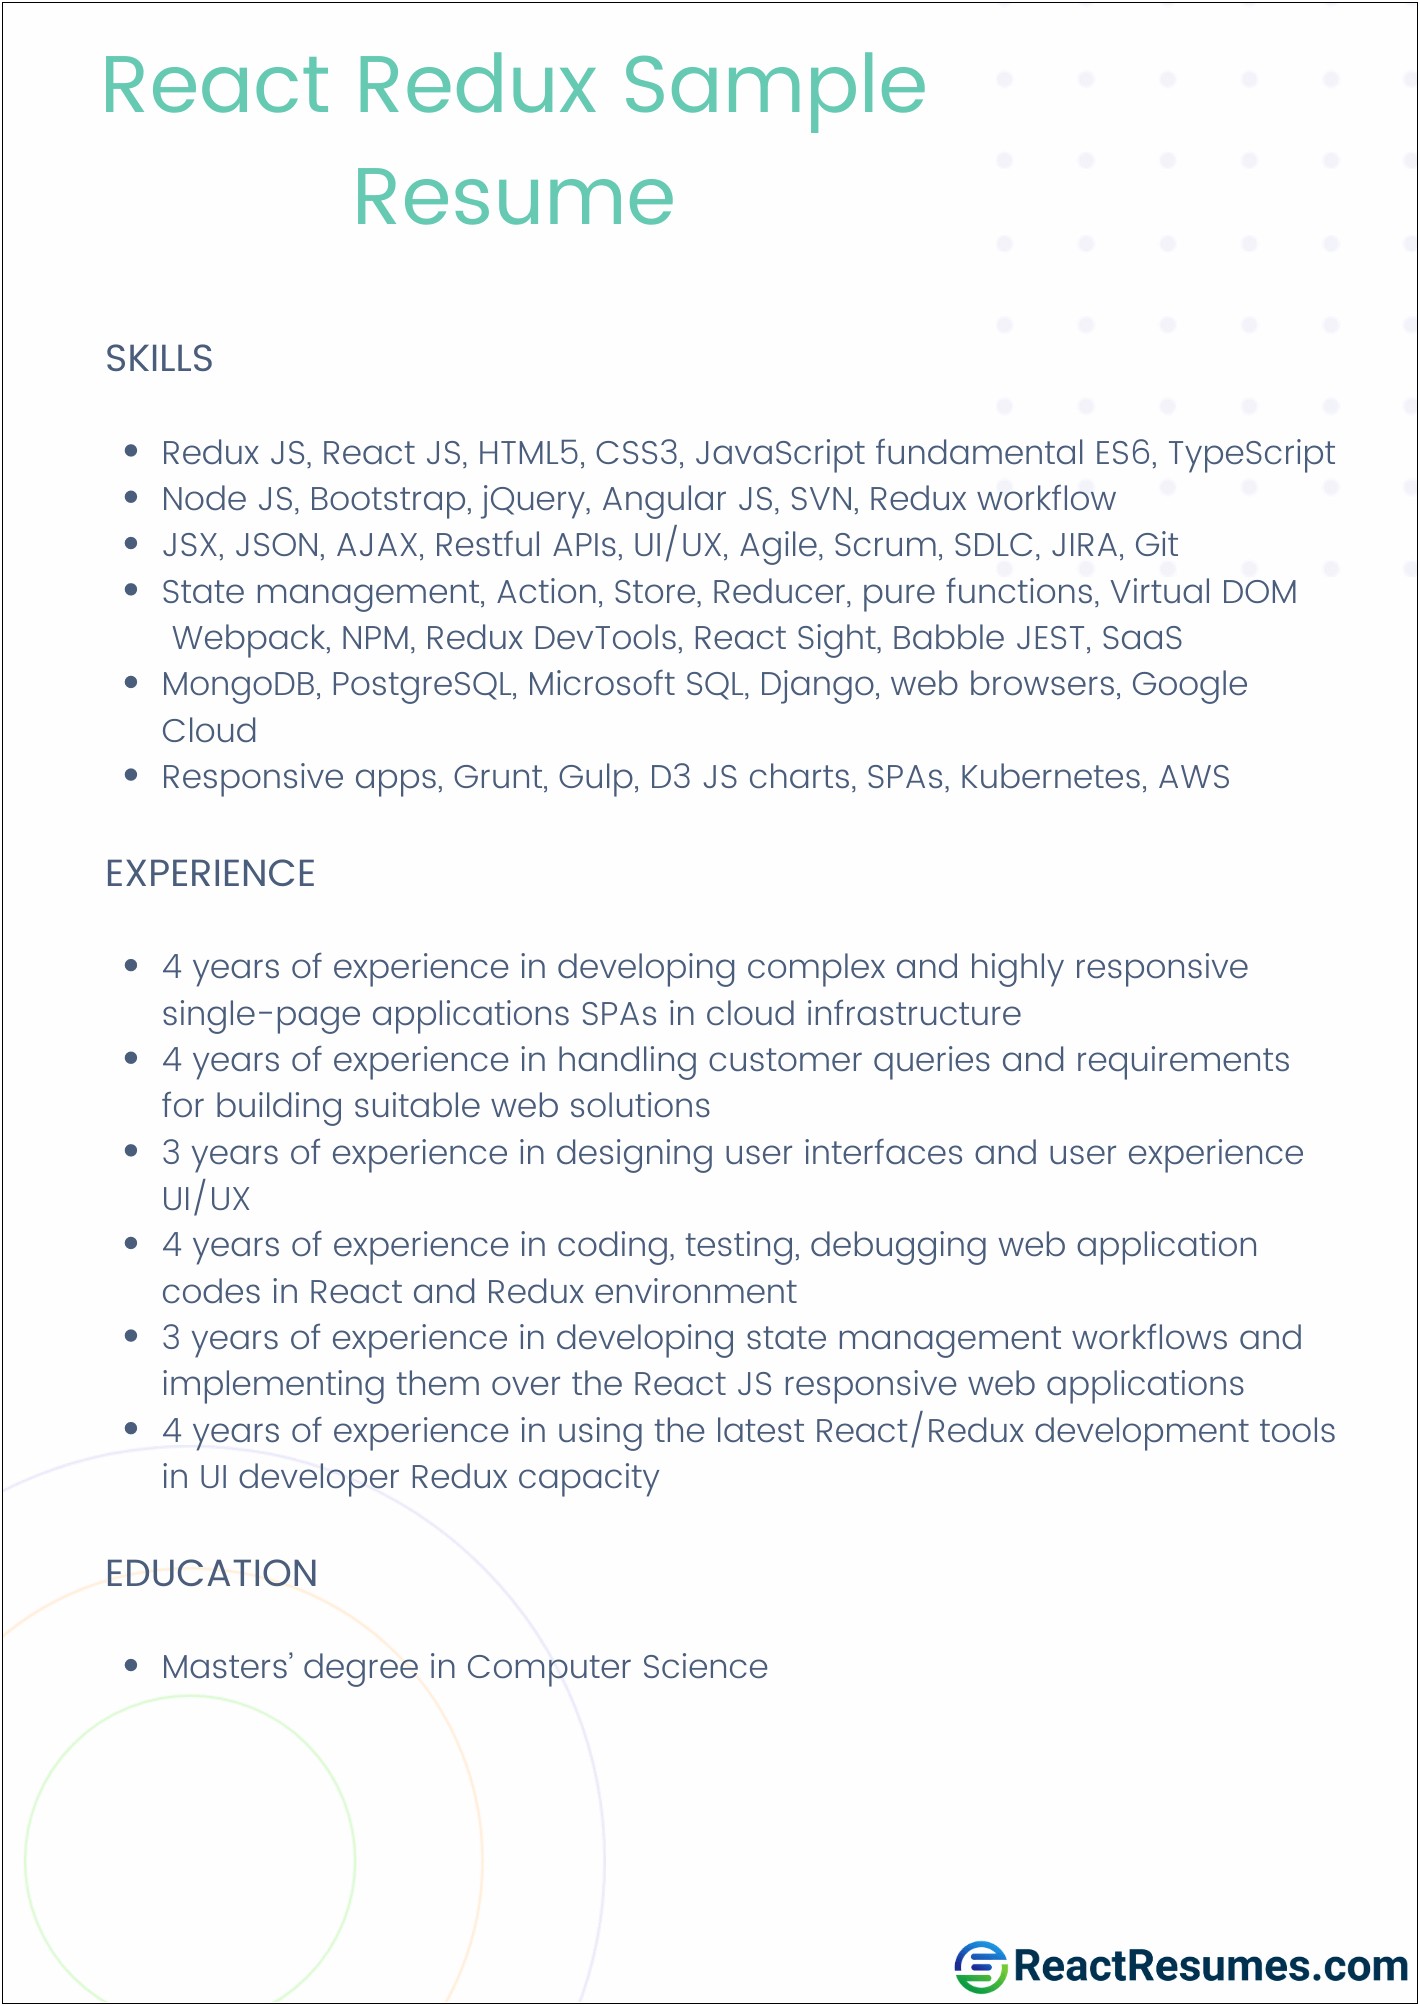 Sample Resume With Aws Experience